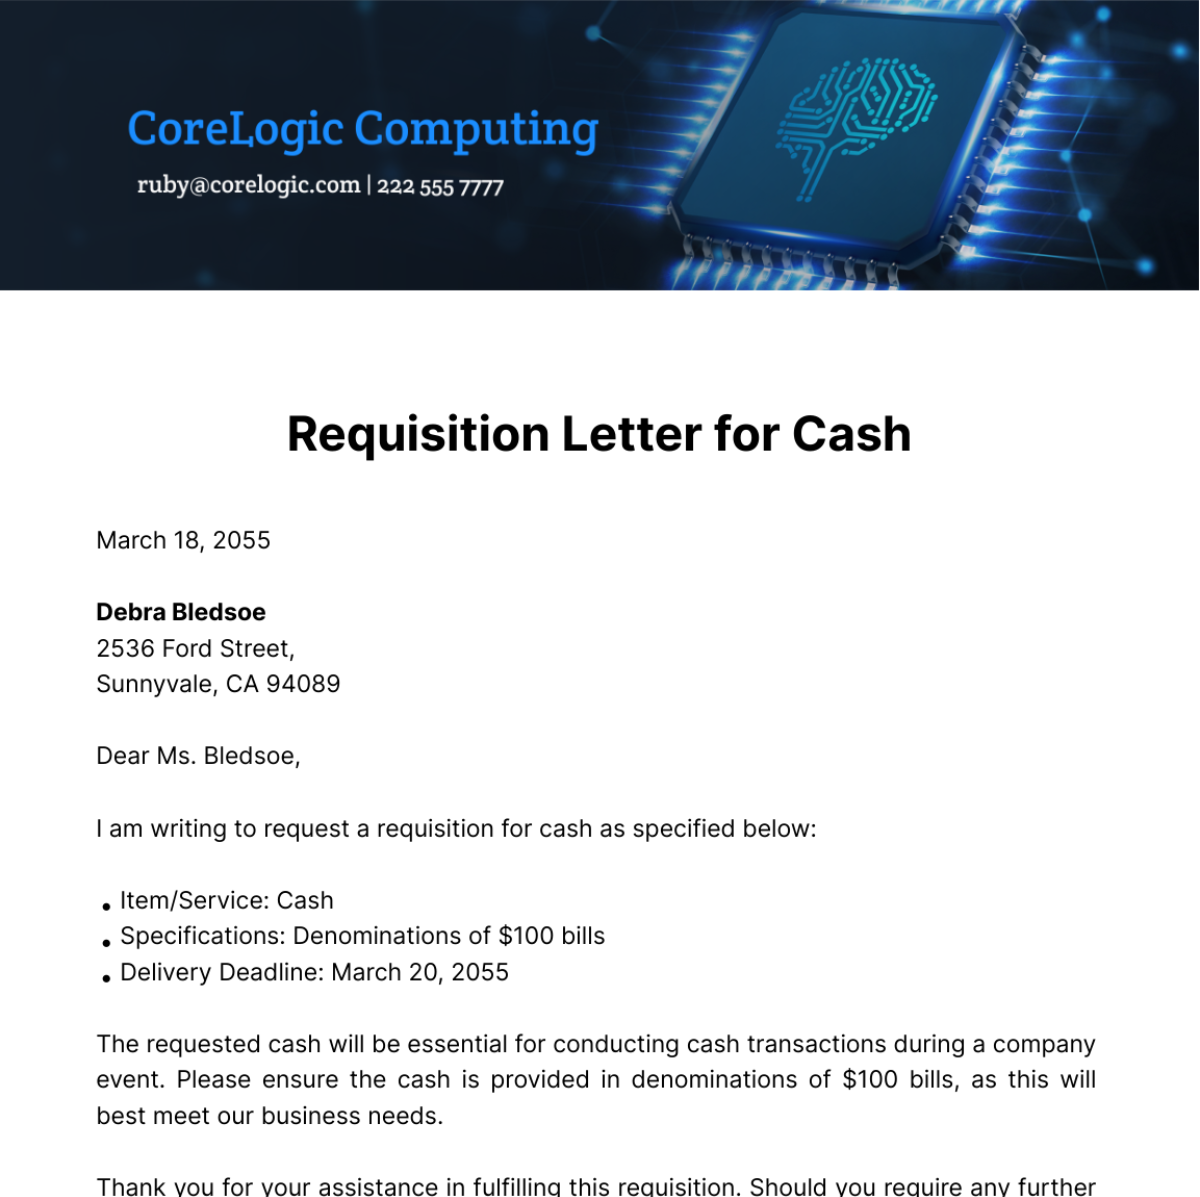 Requisition Letter for Cash Template